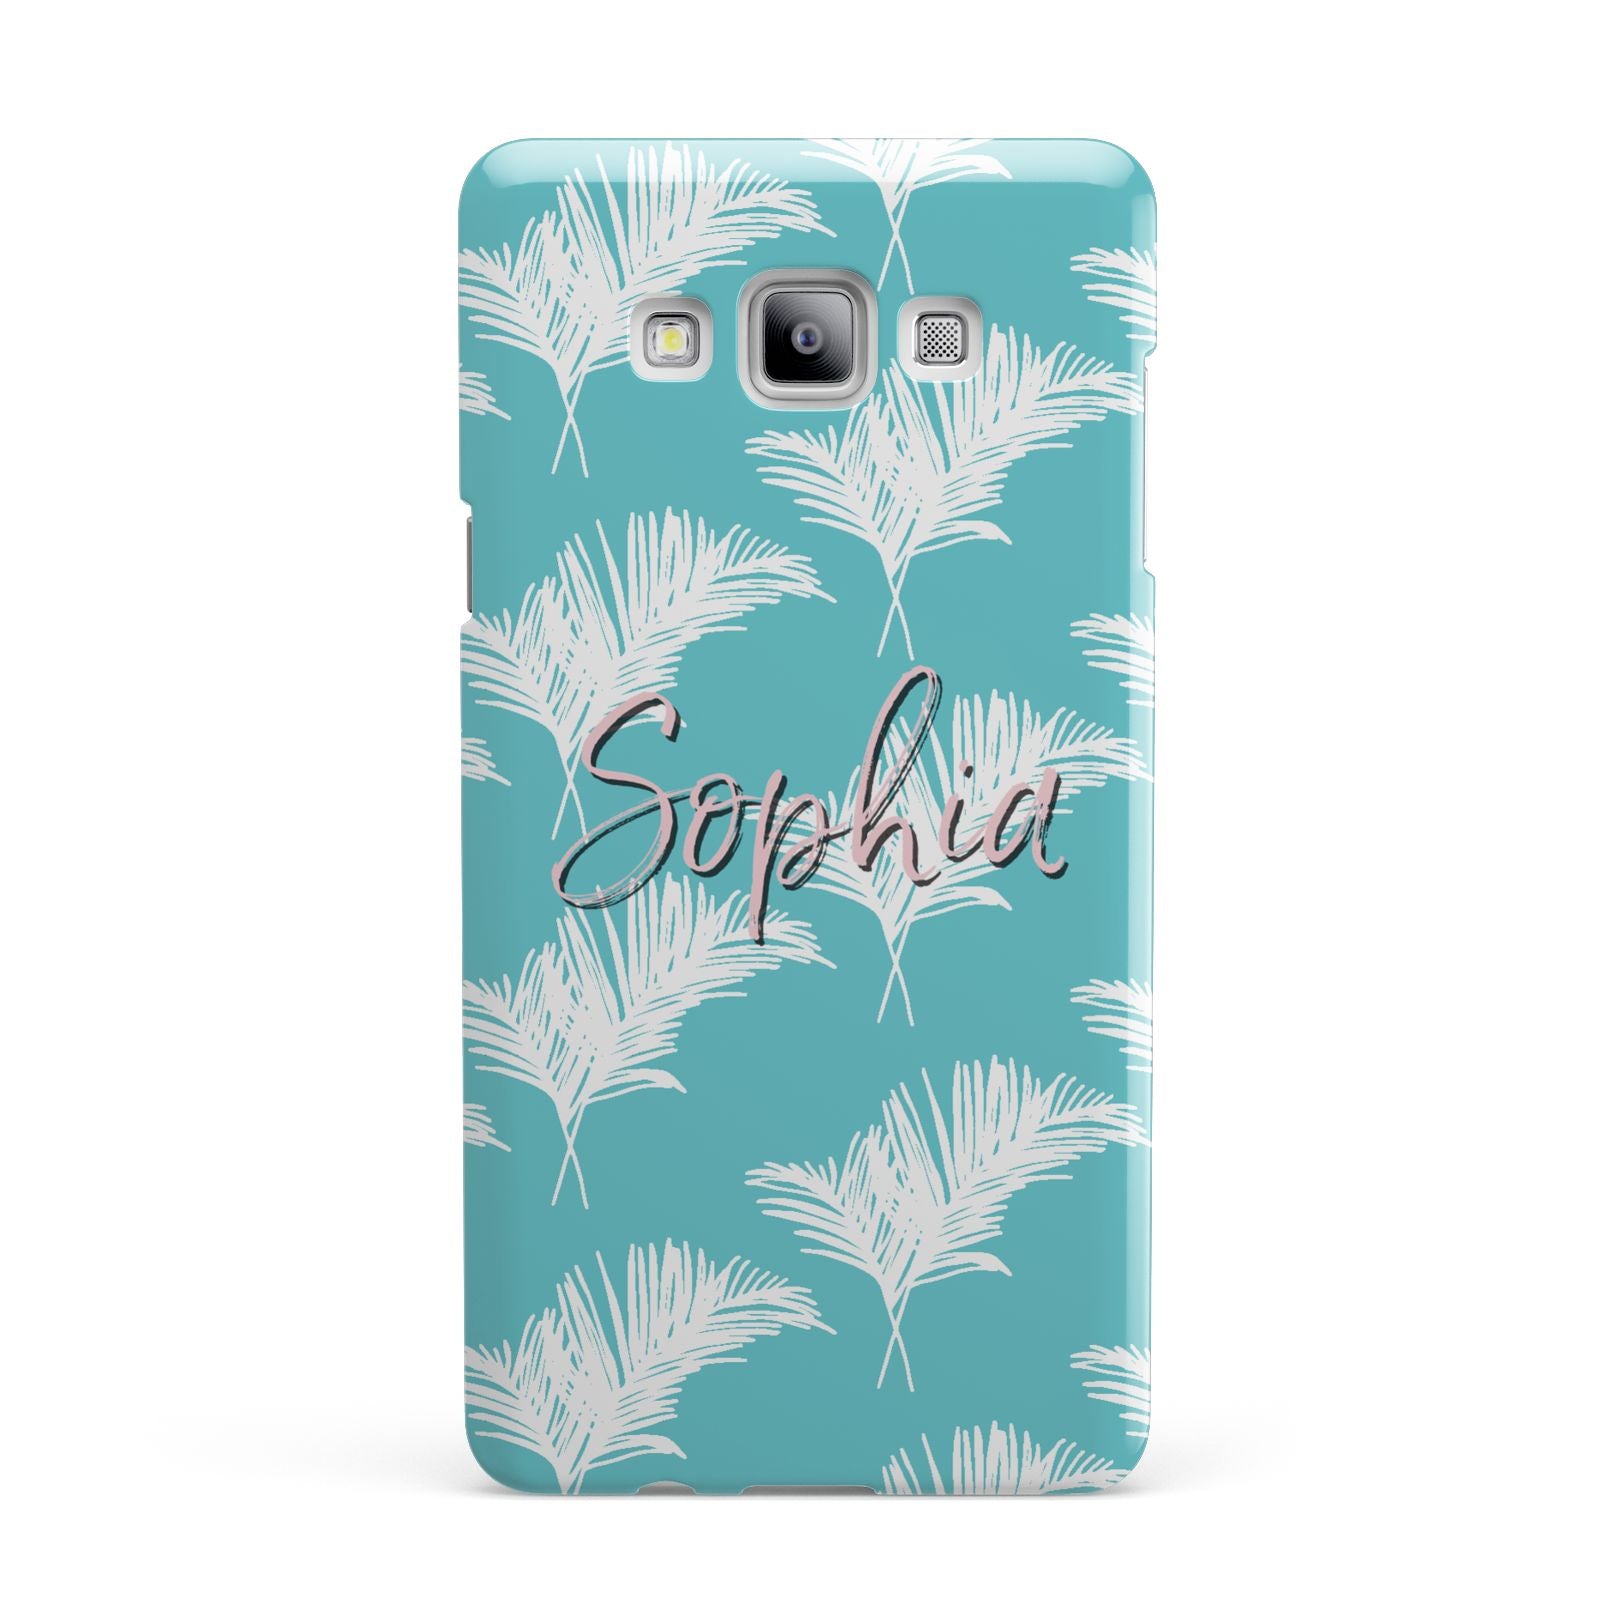 Personalised Blue White Tropical Foliage Samsung Galaxy A7 2015 Case